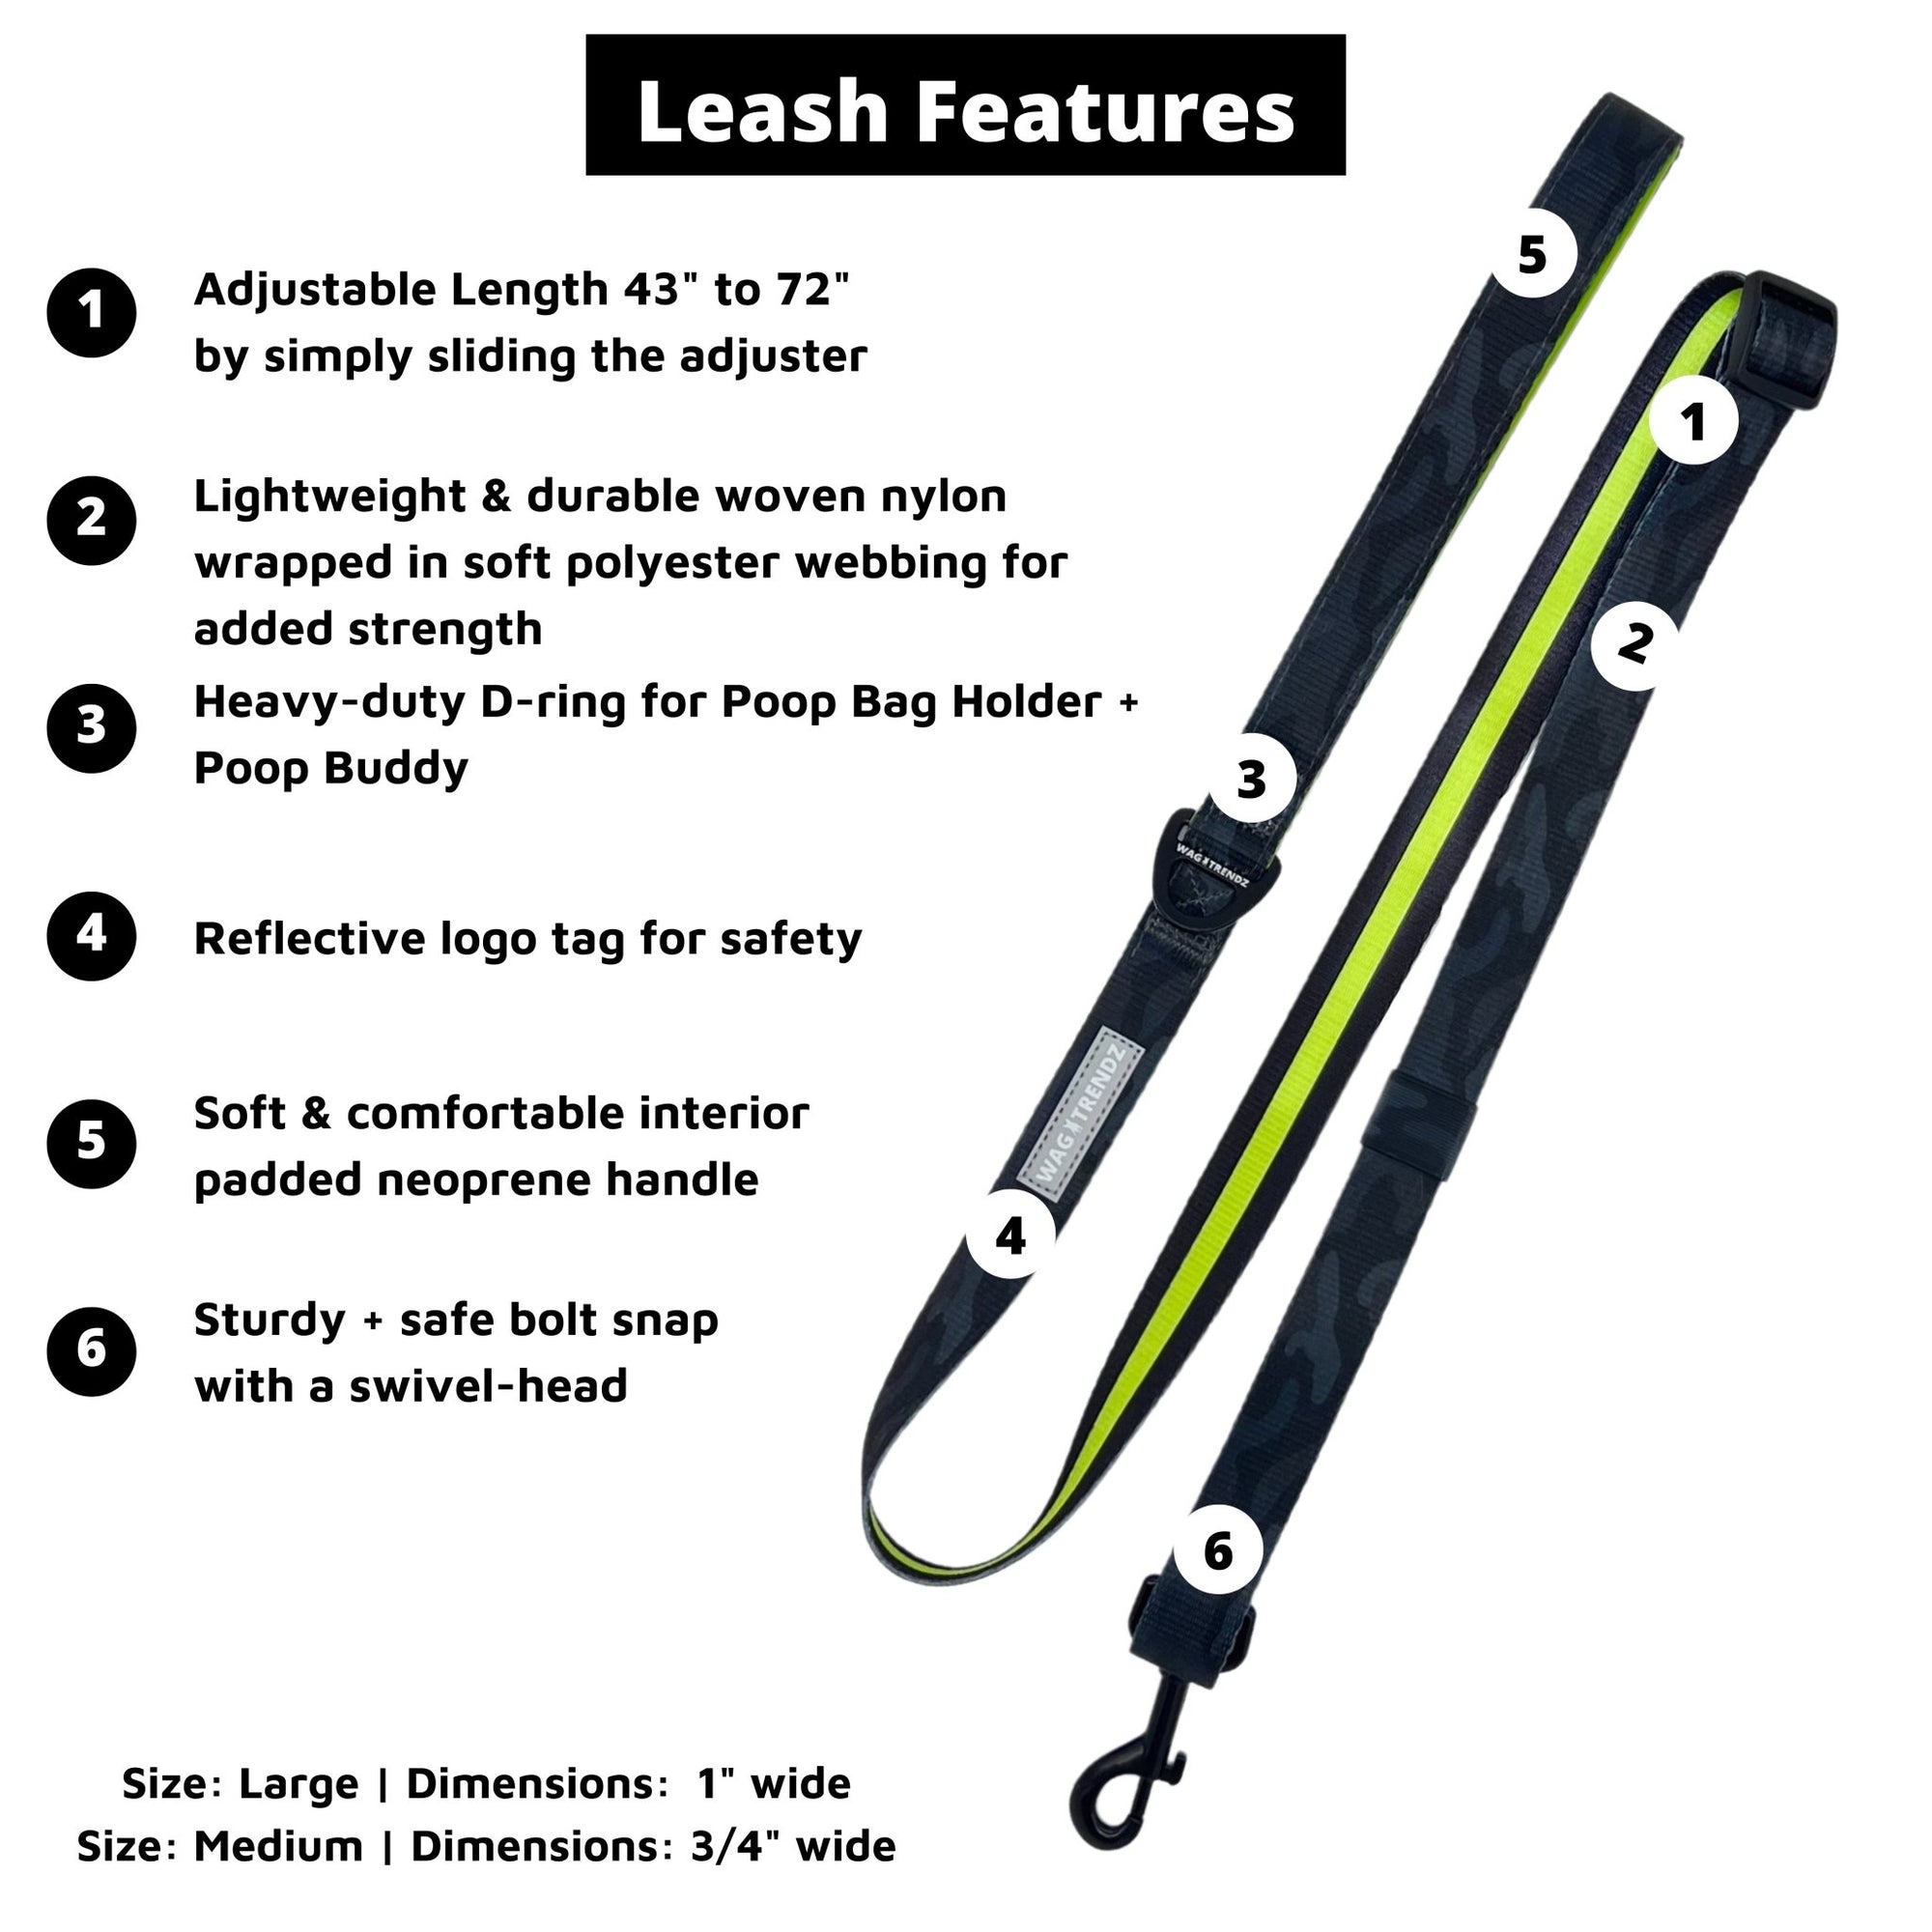 Adjustable Dog Leash - black and grey  Camo with hi-vis accents with product feature captions against a solid white background - Wag Trendz